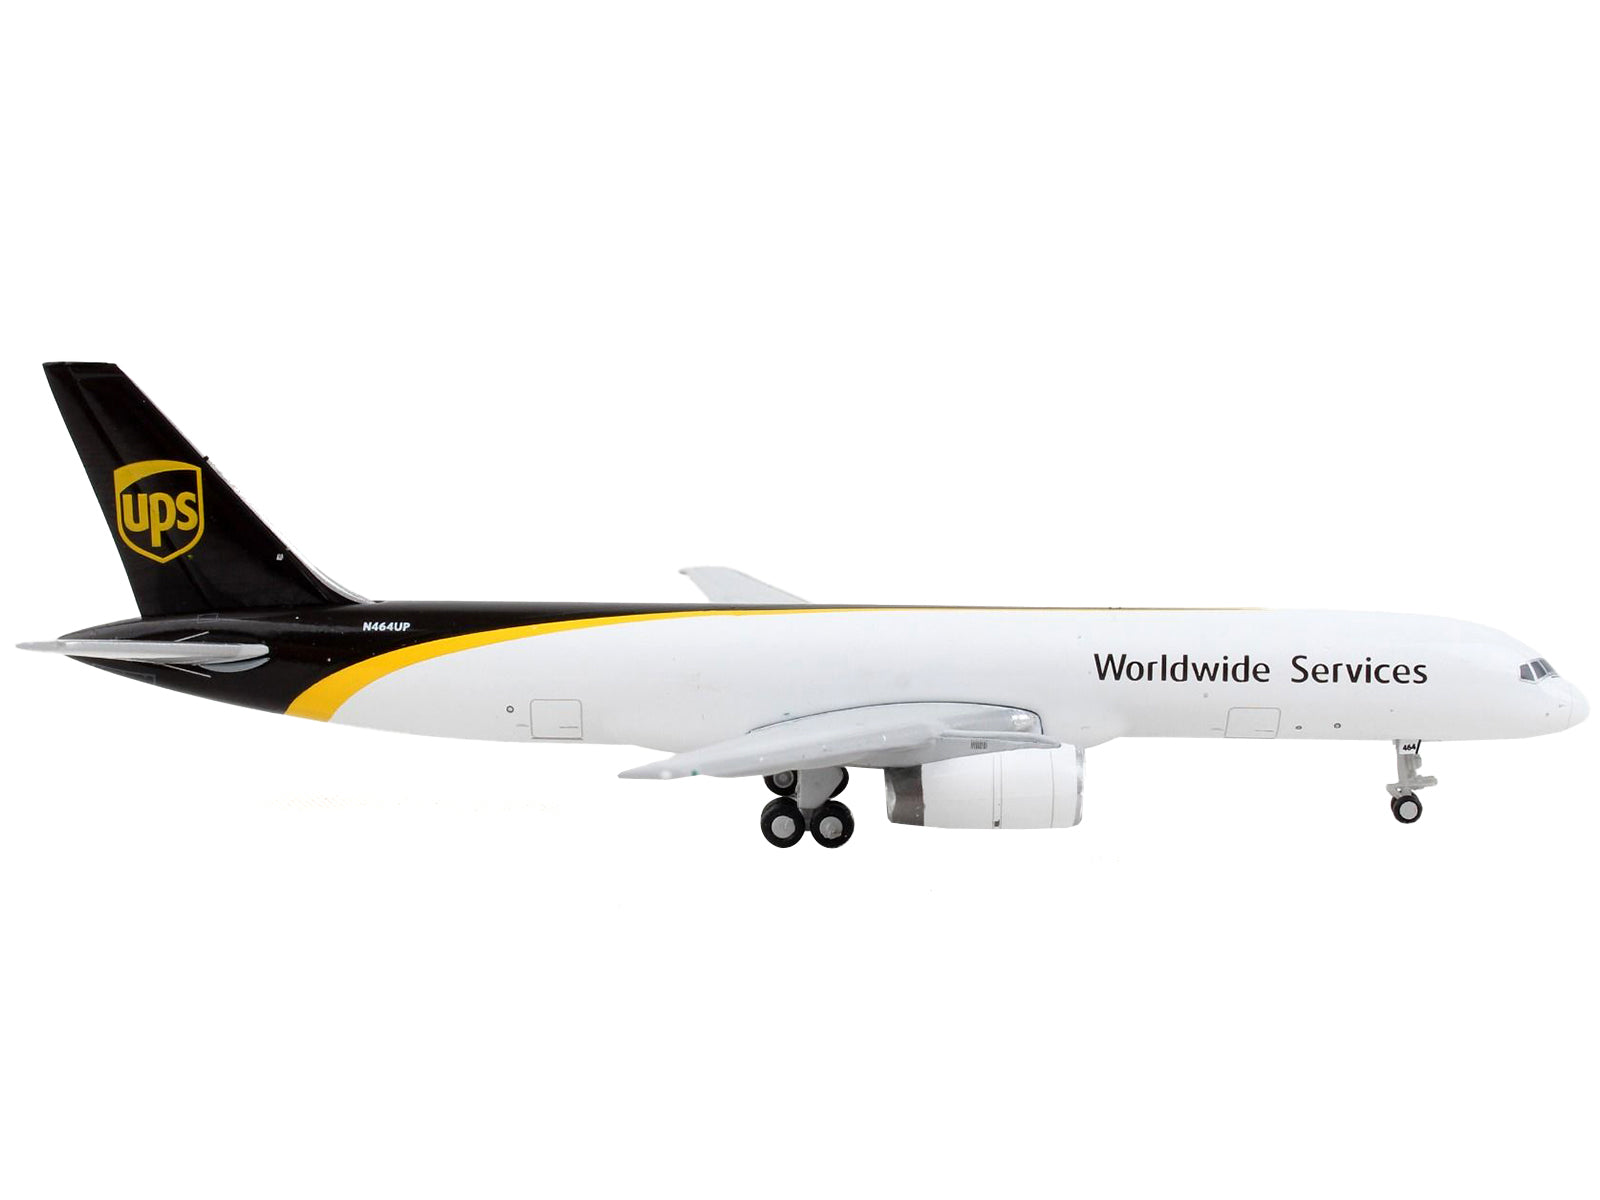 Boeing 757-200F Commercial Aircraft "UPS (United Parcel Service) - Worldwide Services" White and Dark Brown 1/400 Diecast Model Airplane by GeminiJets